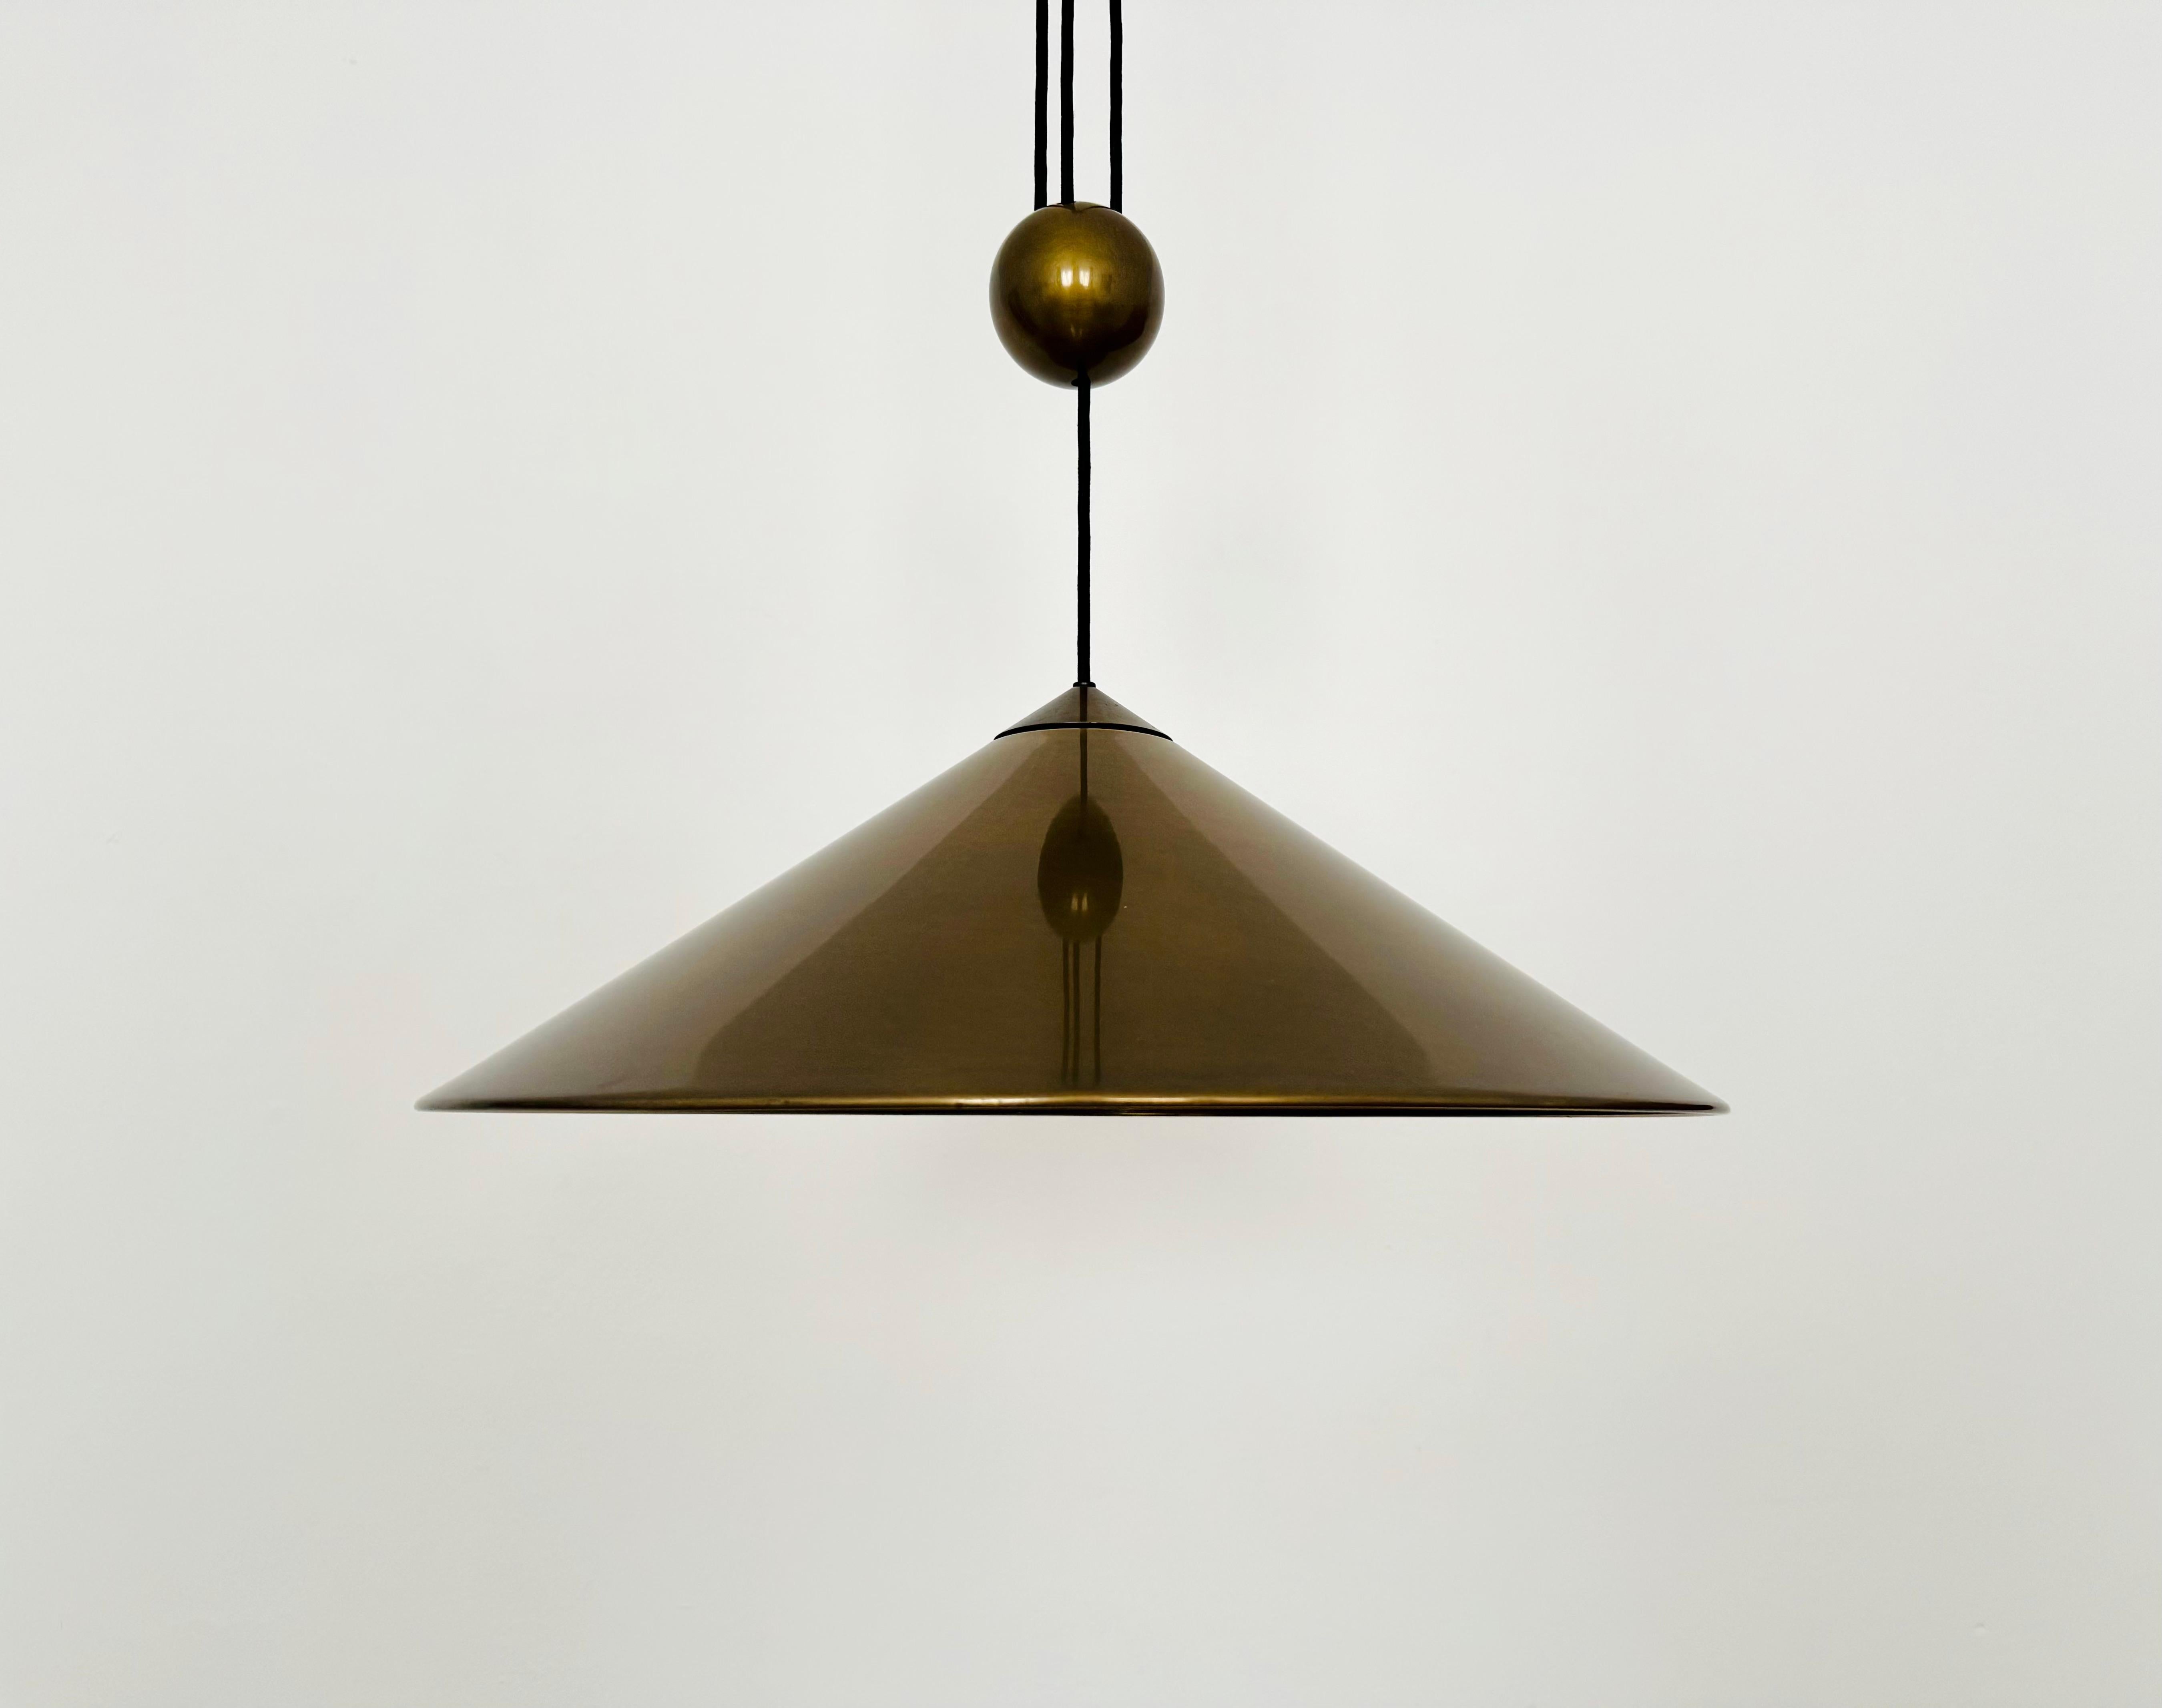 Very nice brass pendant lamp from the 1970s.
The lighting effect of the lamp is extremely beautiful.
The design and the very beautiful details create a very elegant and pleasant light.
The lamp creates a very cozy atmosphere and is very high